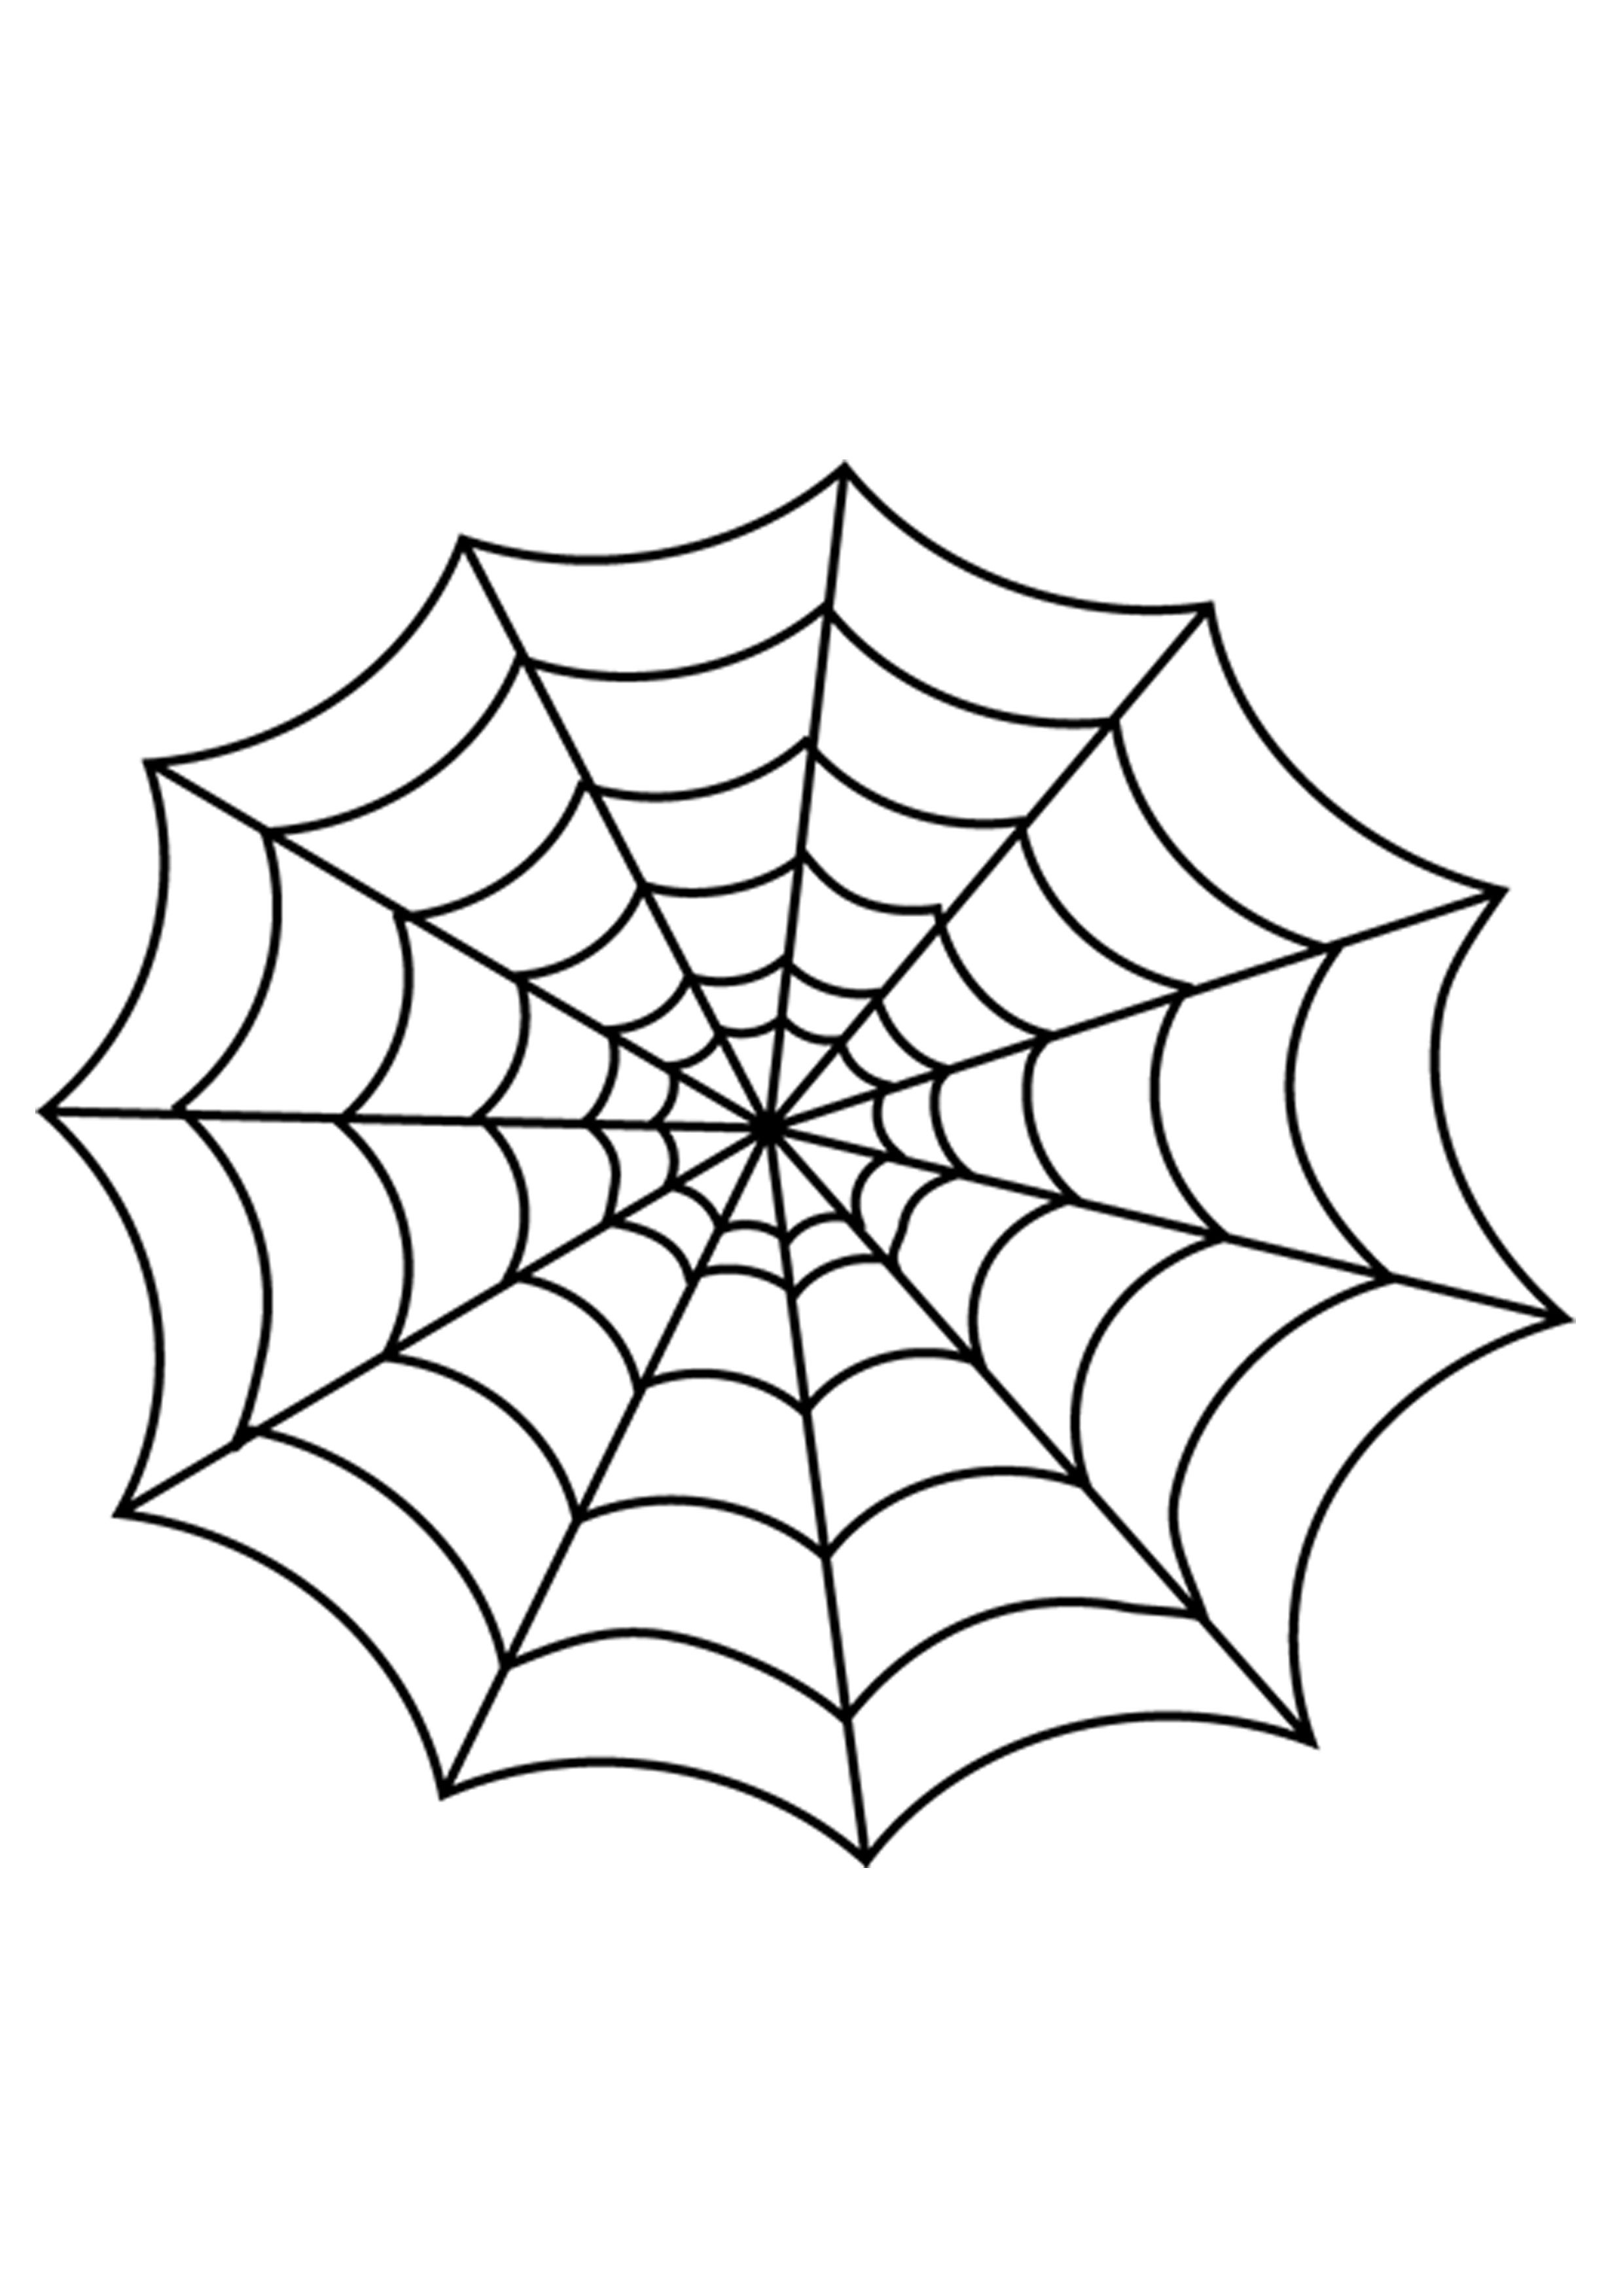 Spider Web Pattern Spider Man Party In 2019 Pumpkin Carving